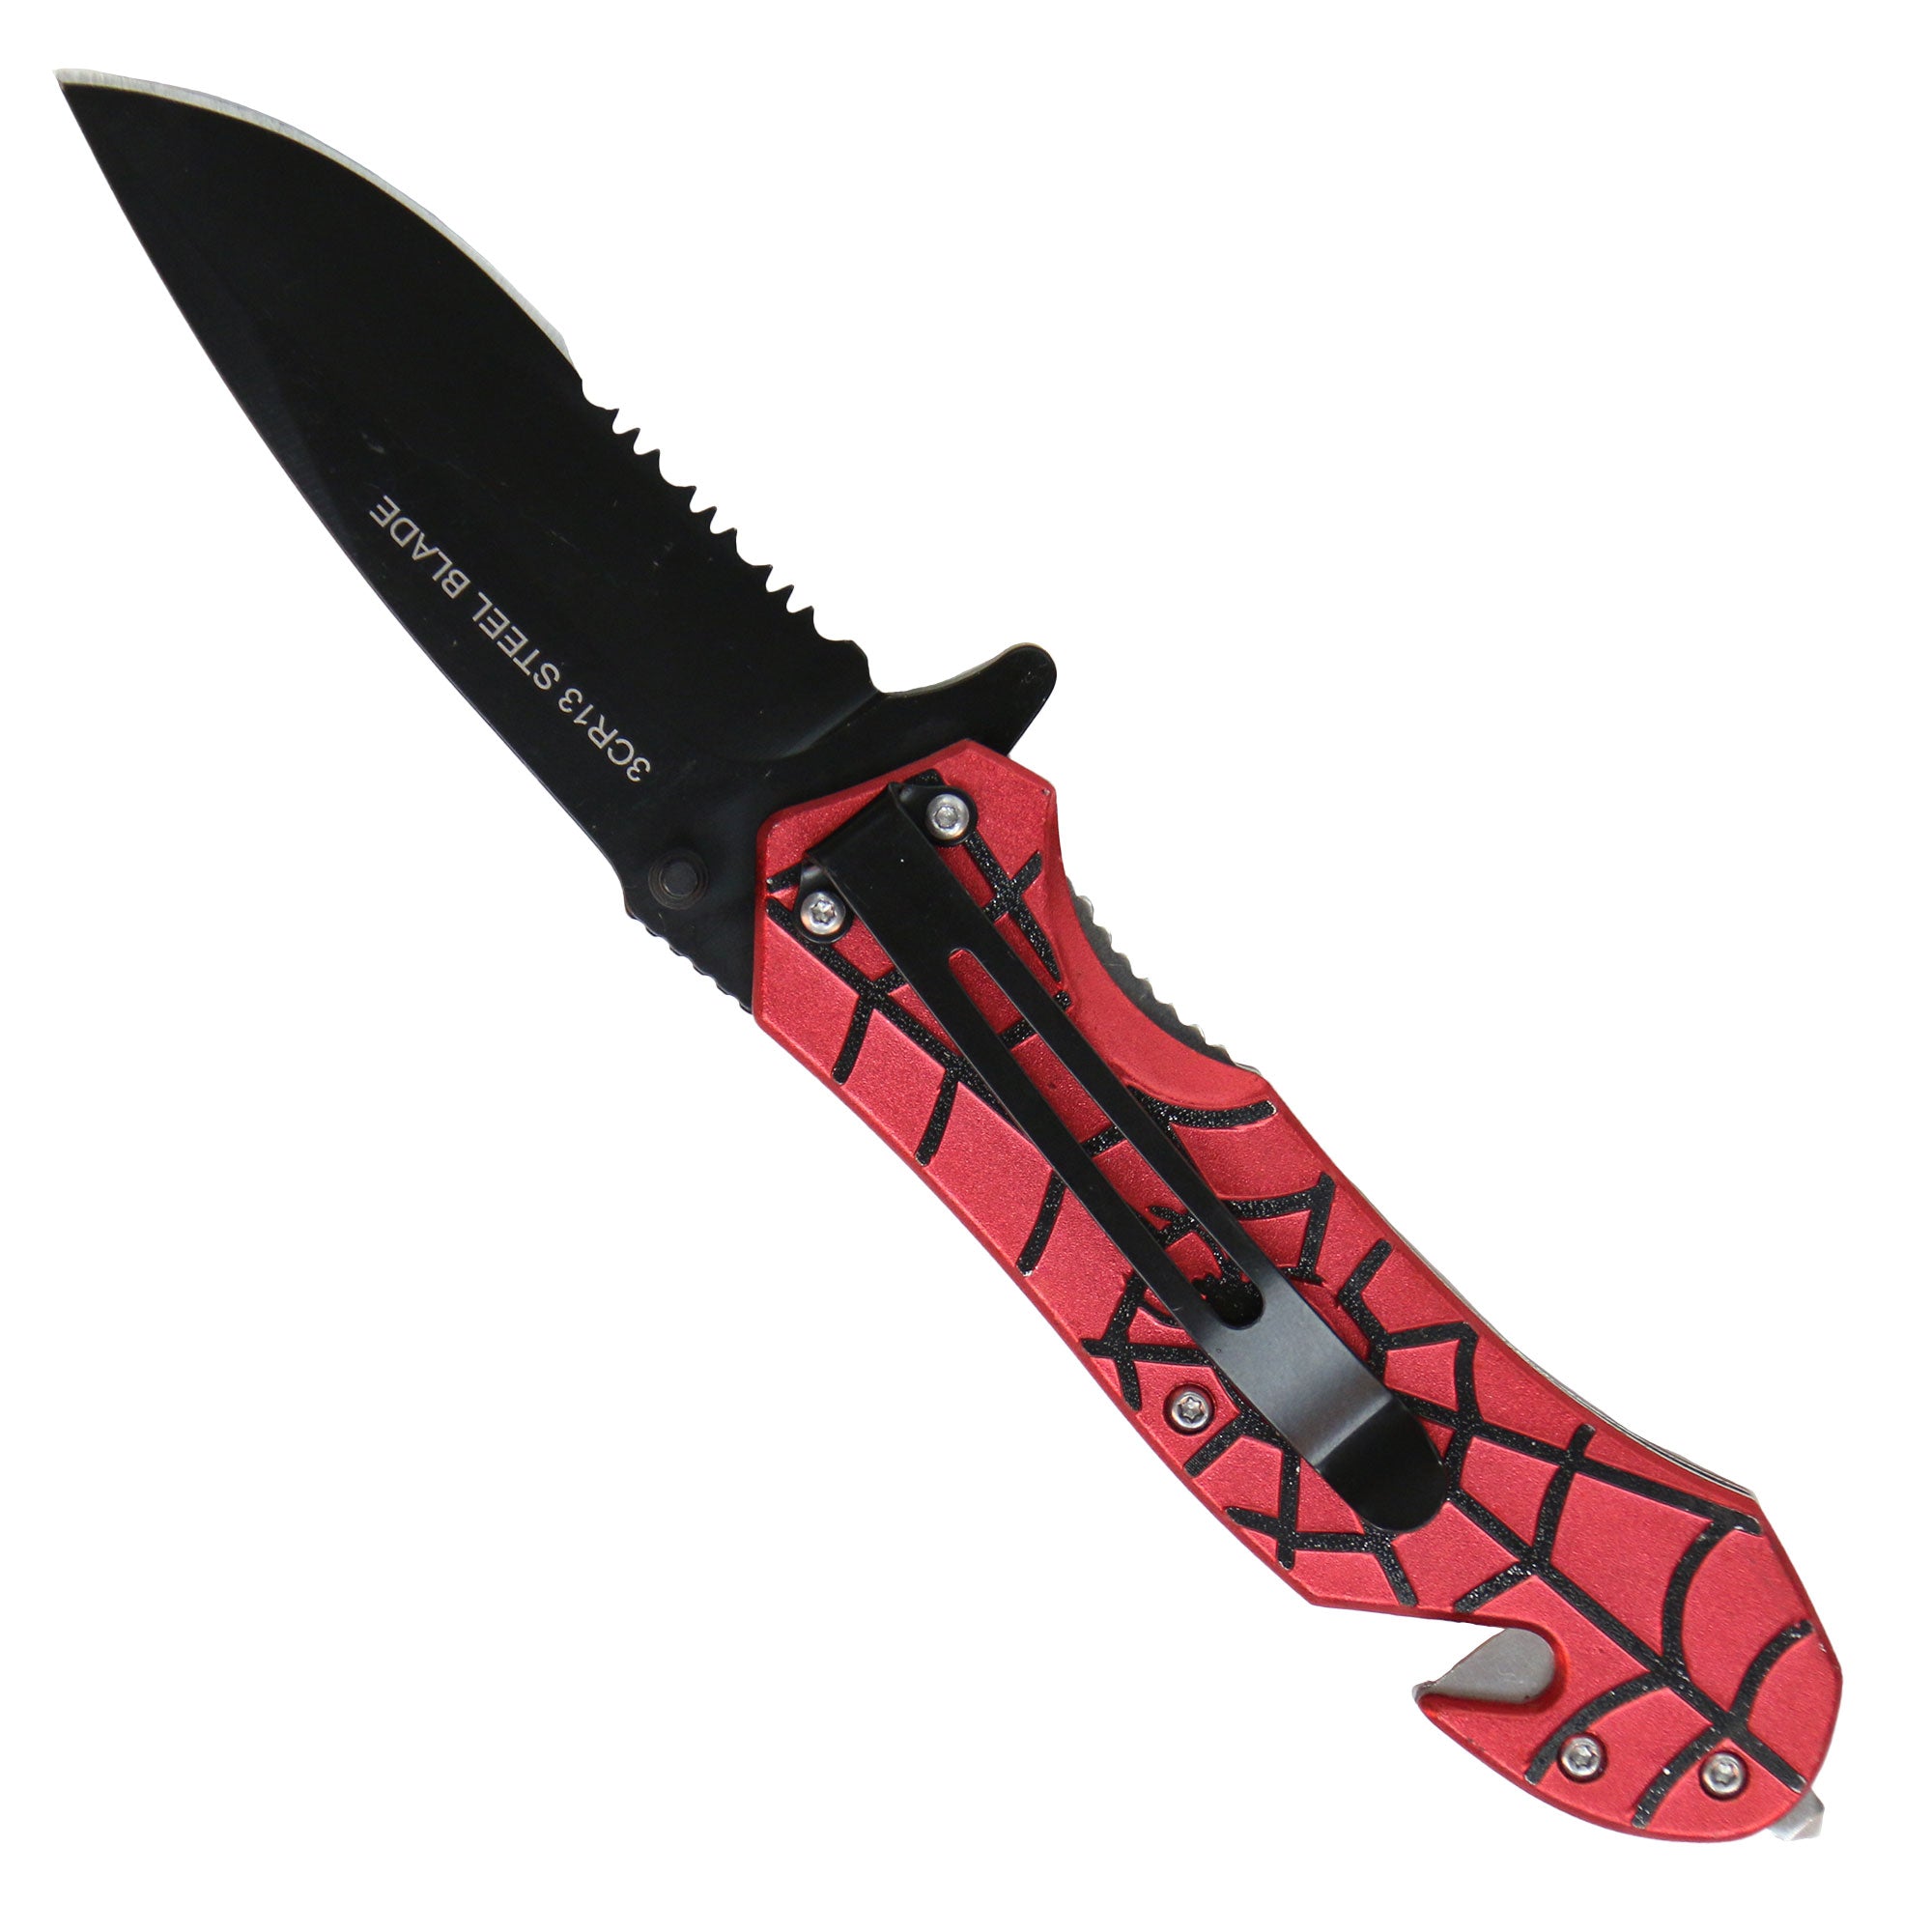 Hot Leathers Red Spider Knife KNA1152